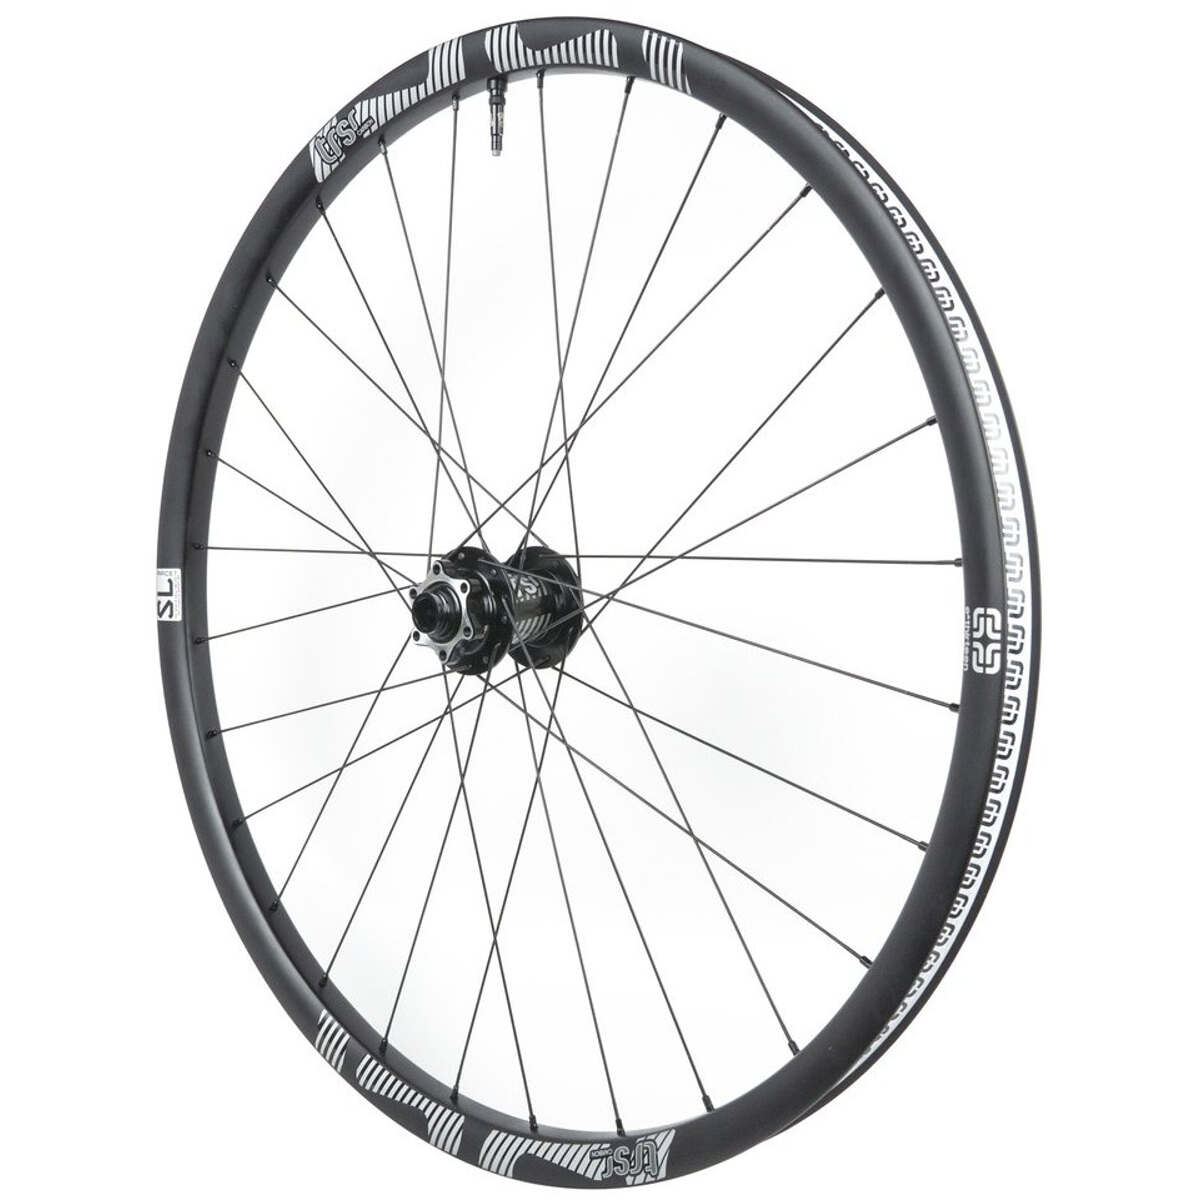 E*thirteen Ruota TRS Race Carbon SL Anteriore, 27.5 Pouces, 110x15 mm, Boost, 28 mm, tubeless ready, Nero